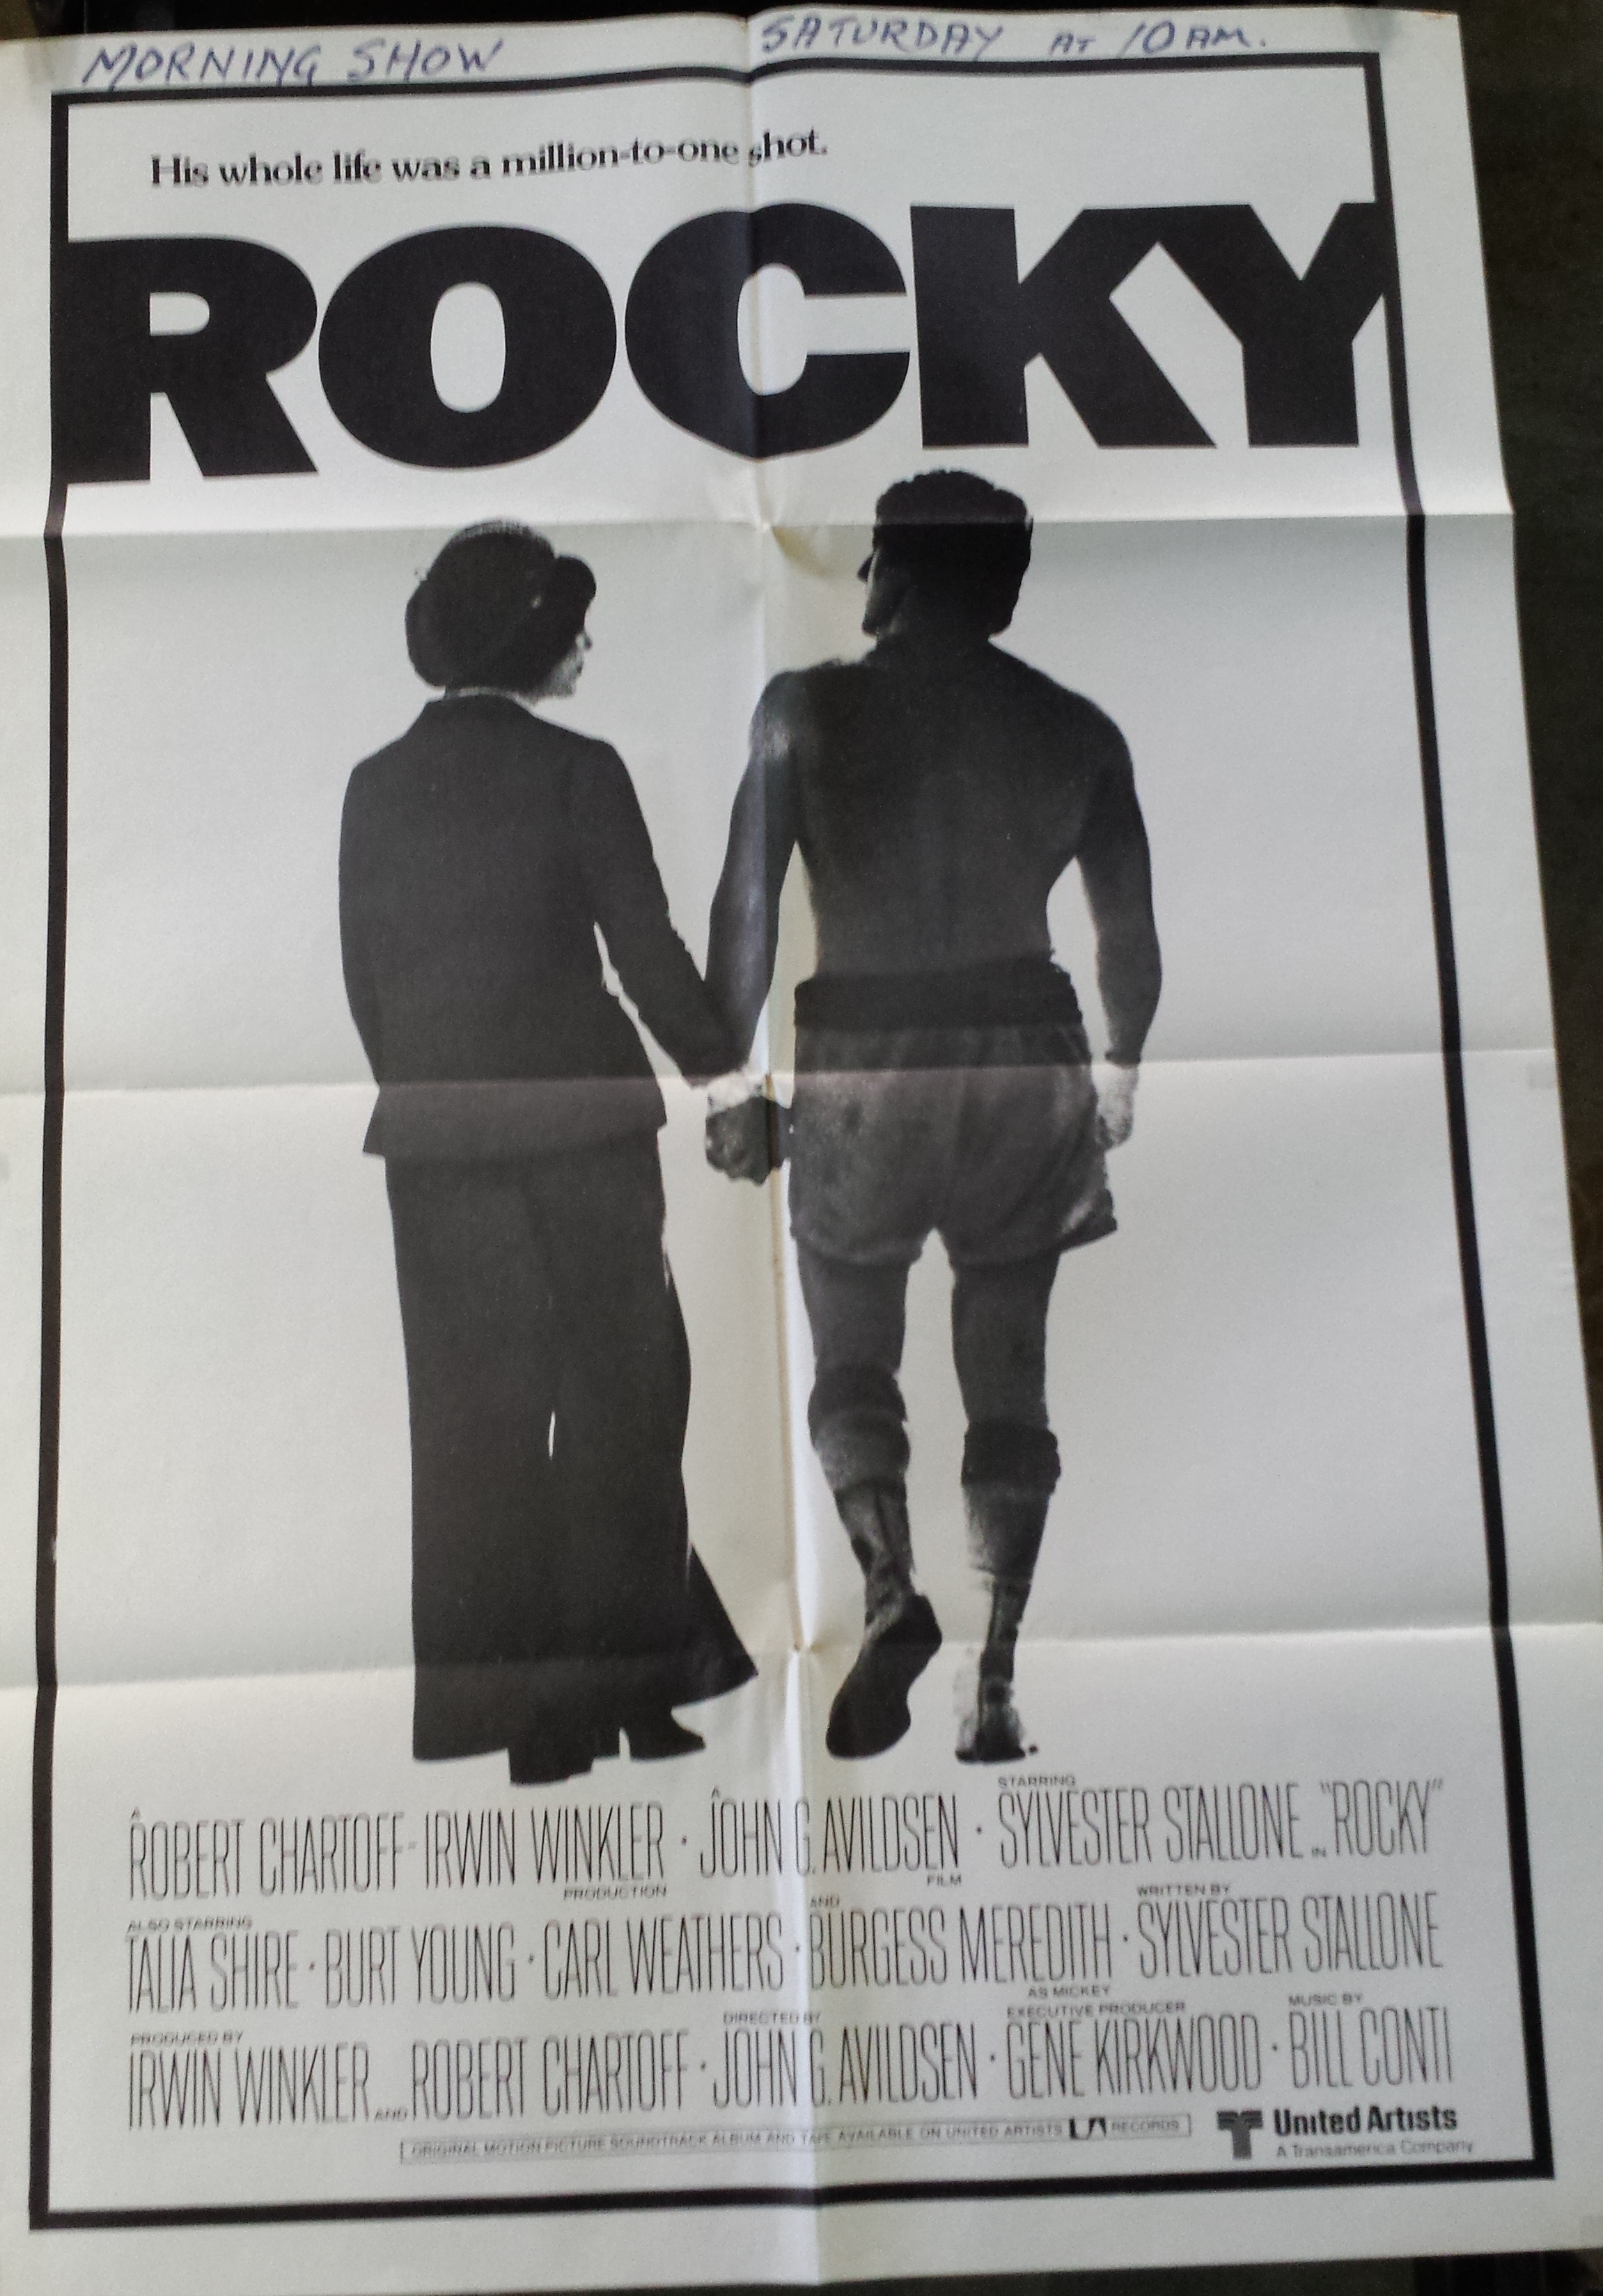 A Vintage Rocky Film Poster United Artists. Good Condition. 1010 x 700mm